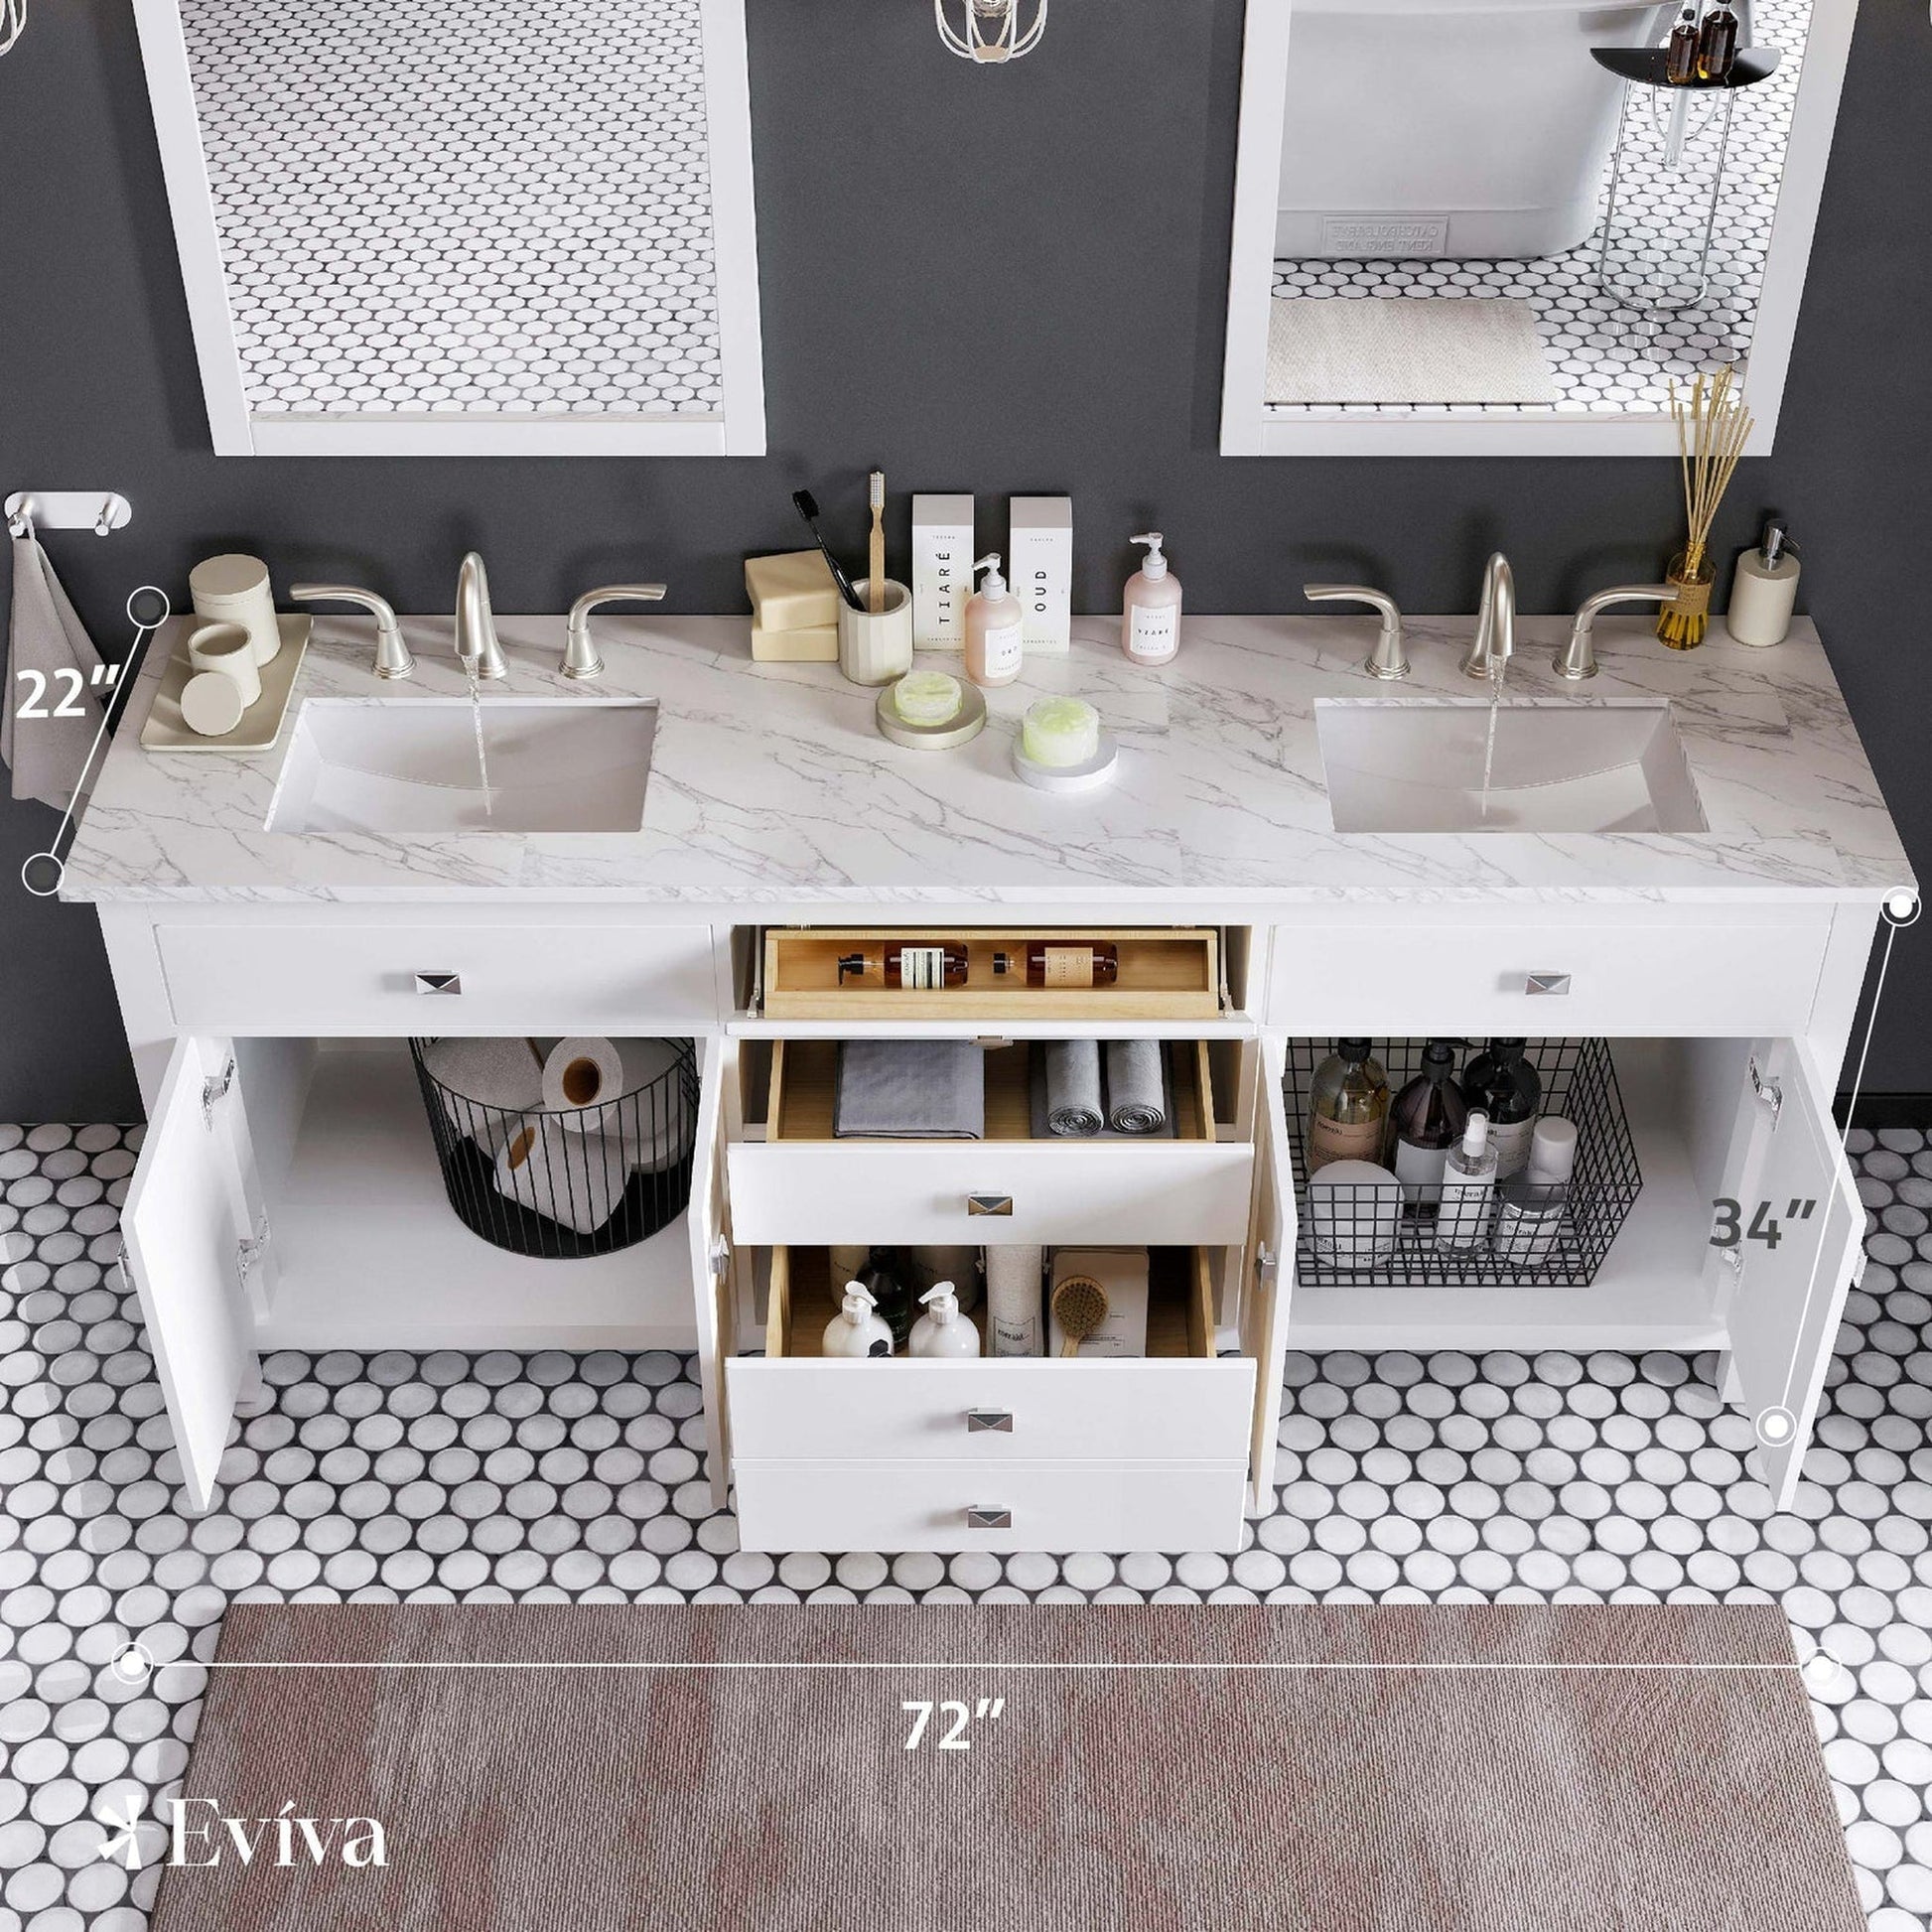 Eviva Totti Artemis 72" x 34" White Freestanding Bathroom Vanity With Carrara Style Man-made Stone Countertop and Double Undermount Sink